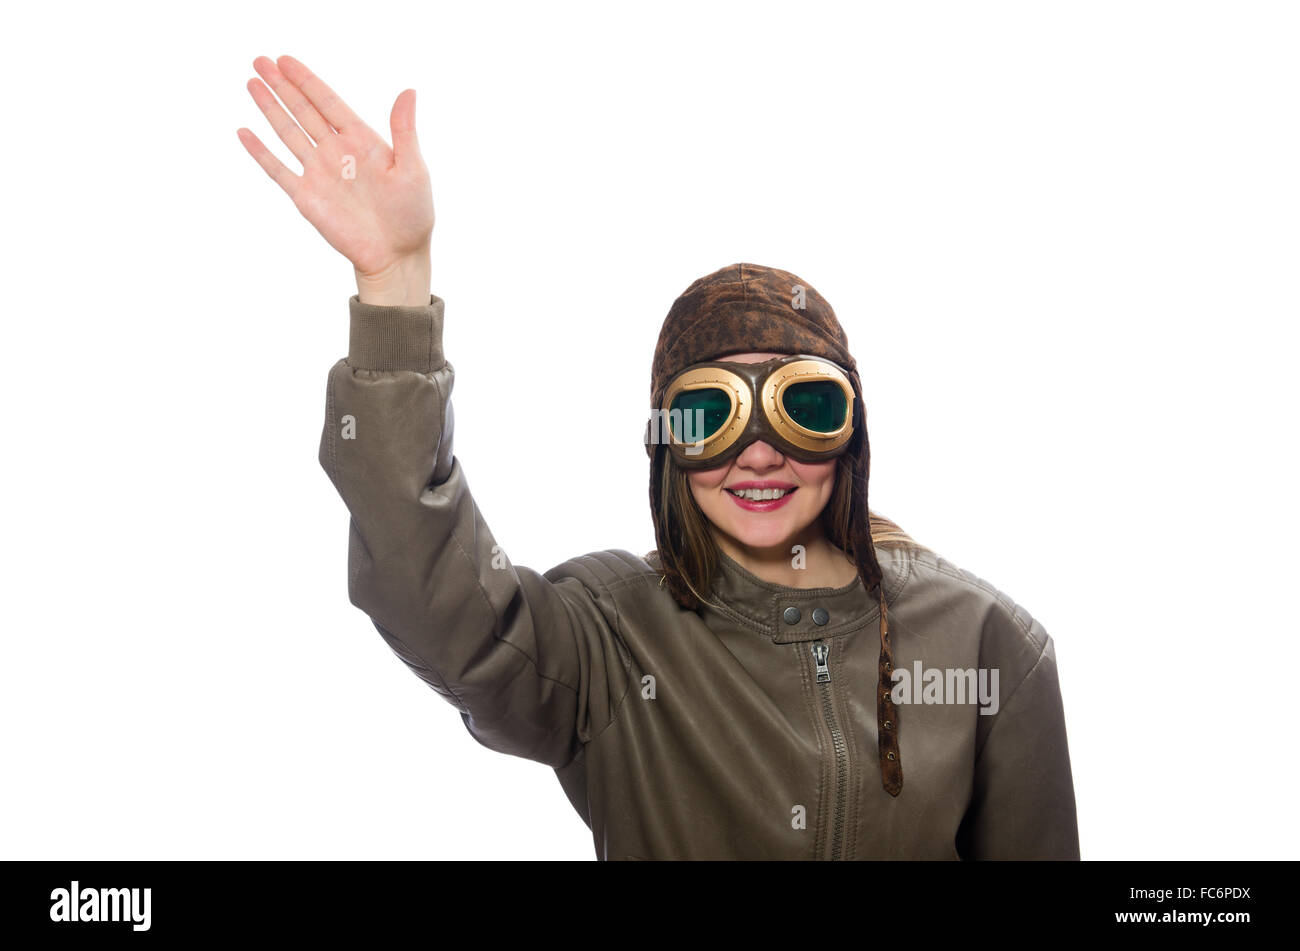 Funny woman pilot isolated on white Stock Photo